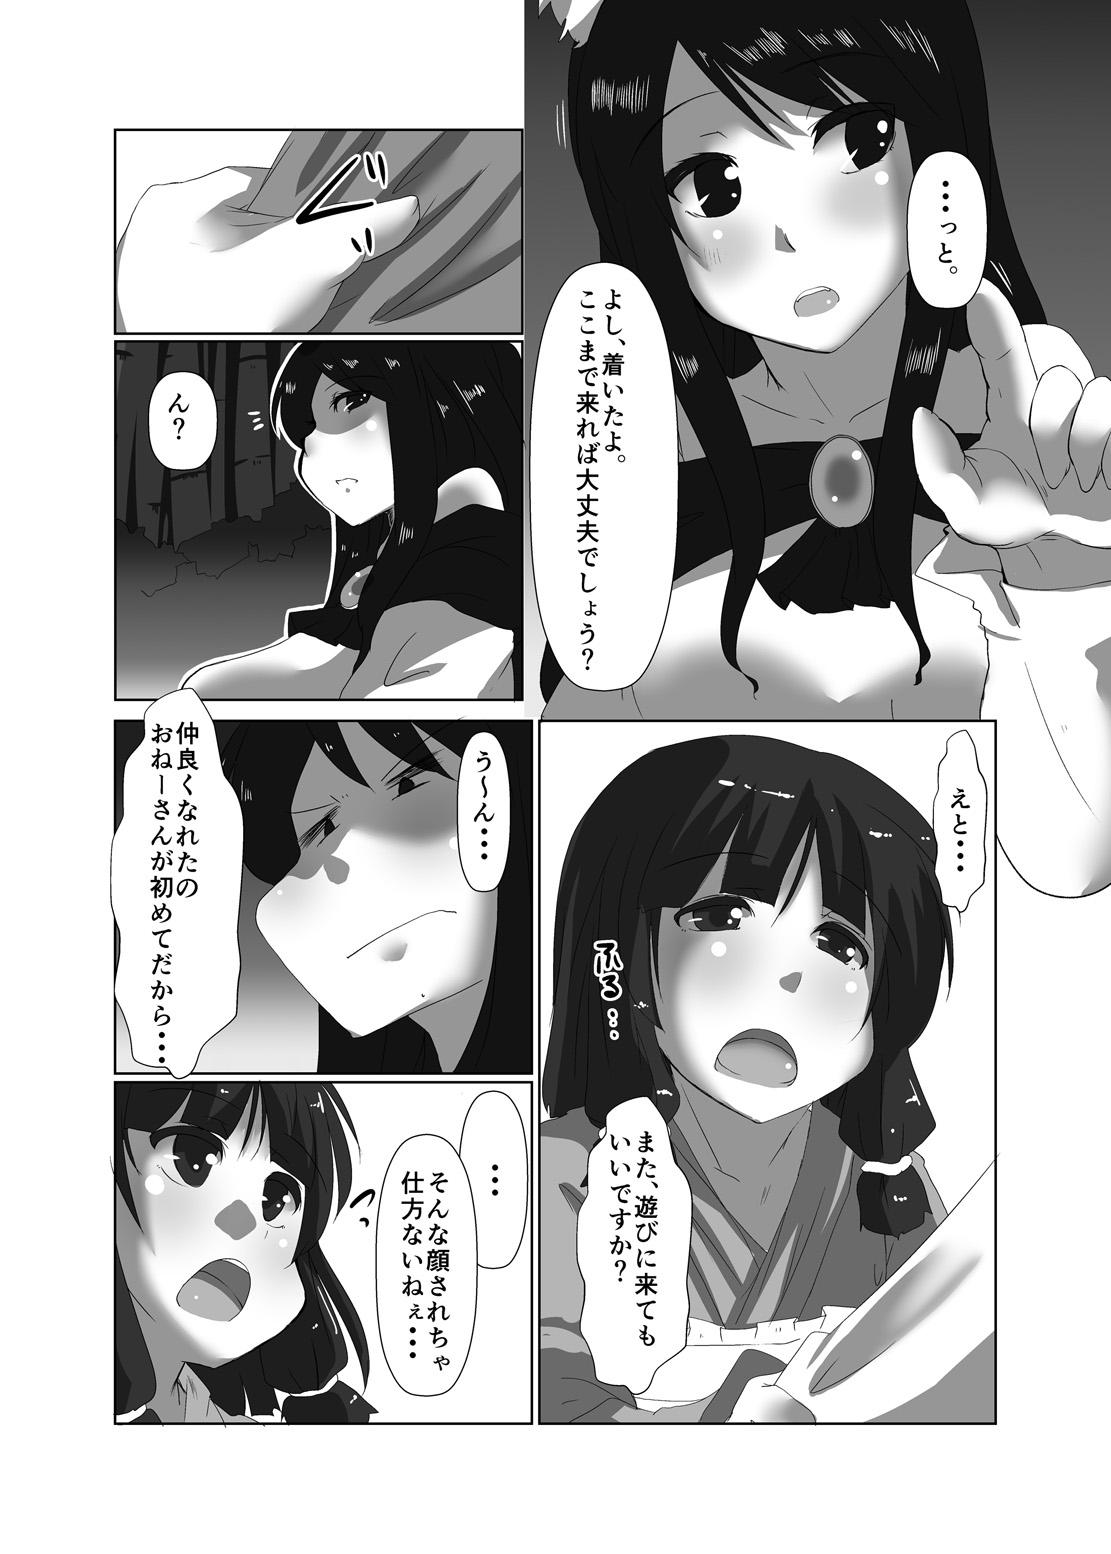 Natural ELonely Wolf no Onee-san - Touhou project Babe - Page 10